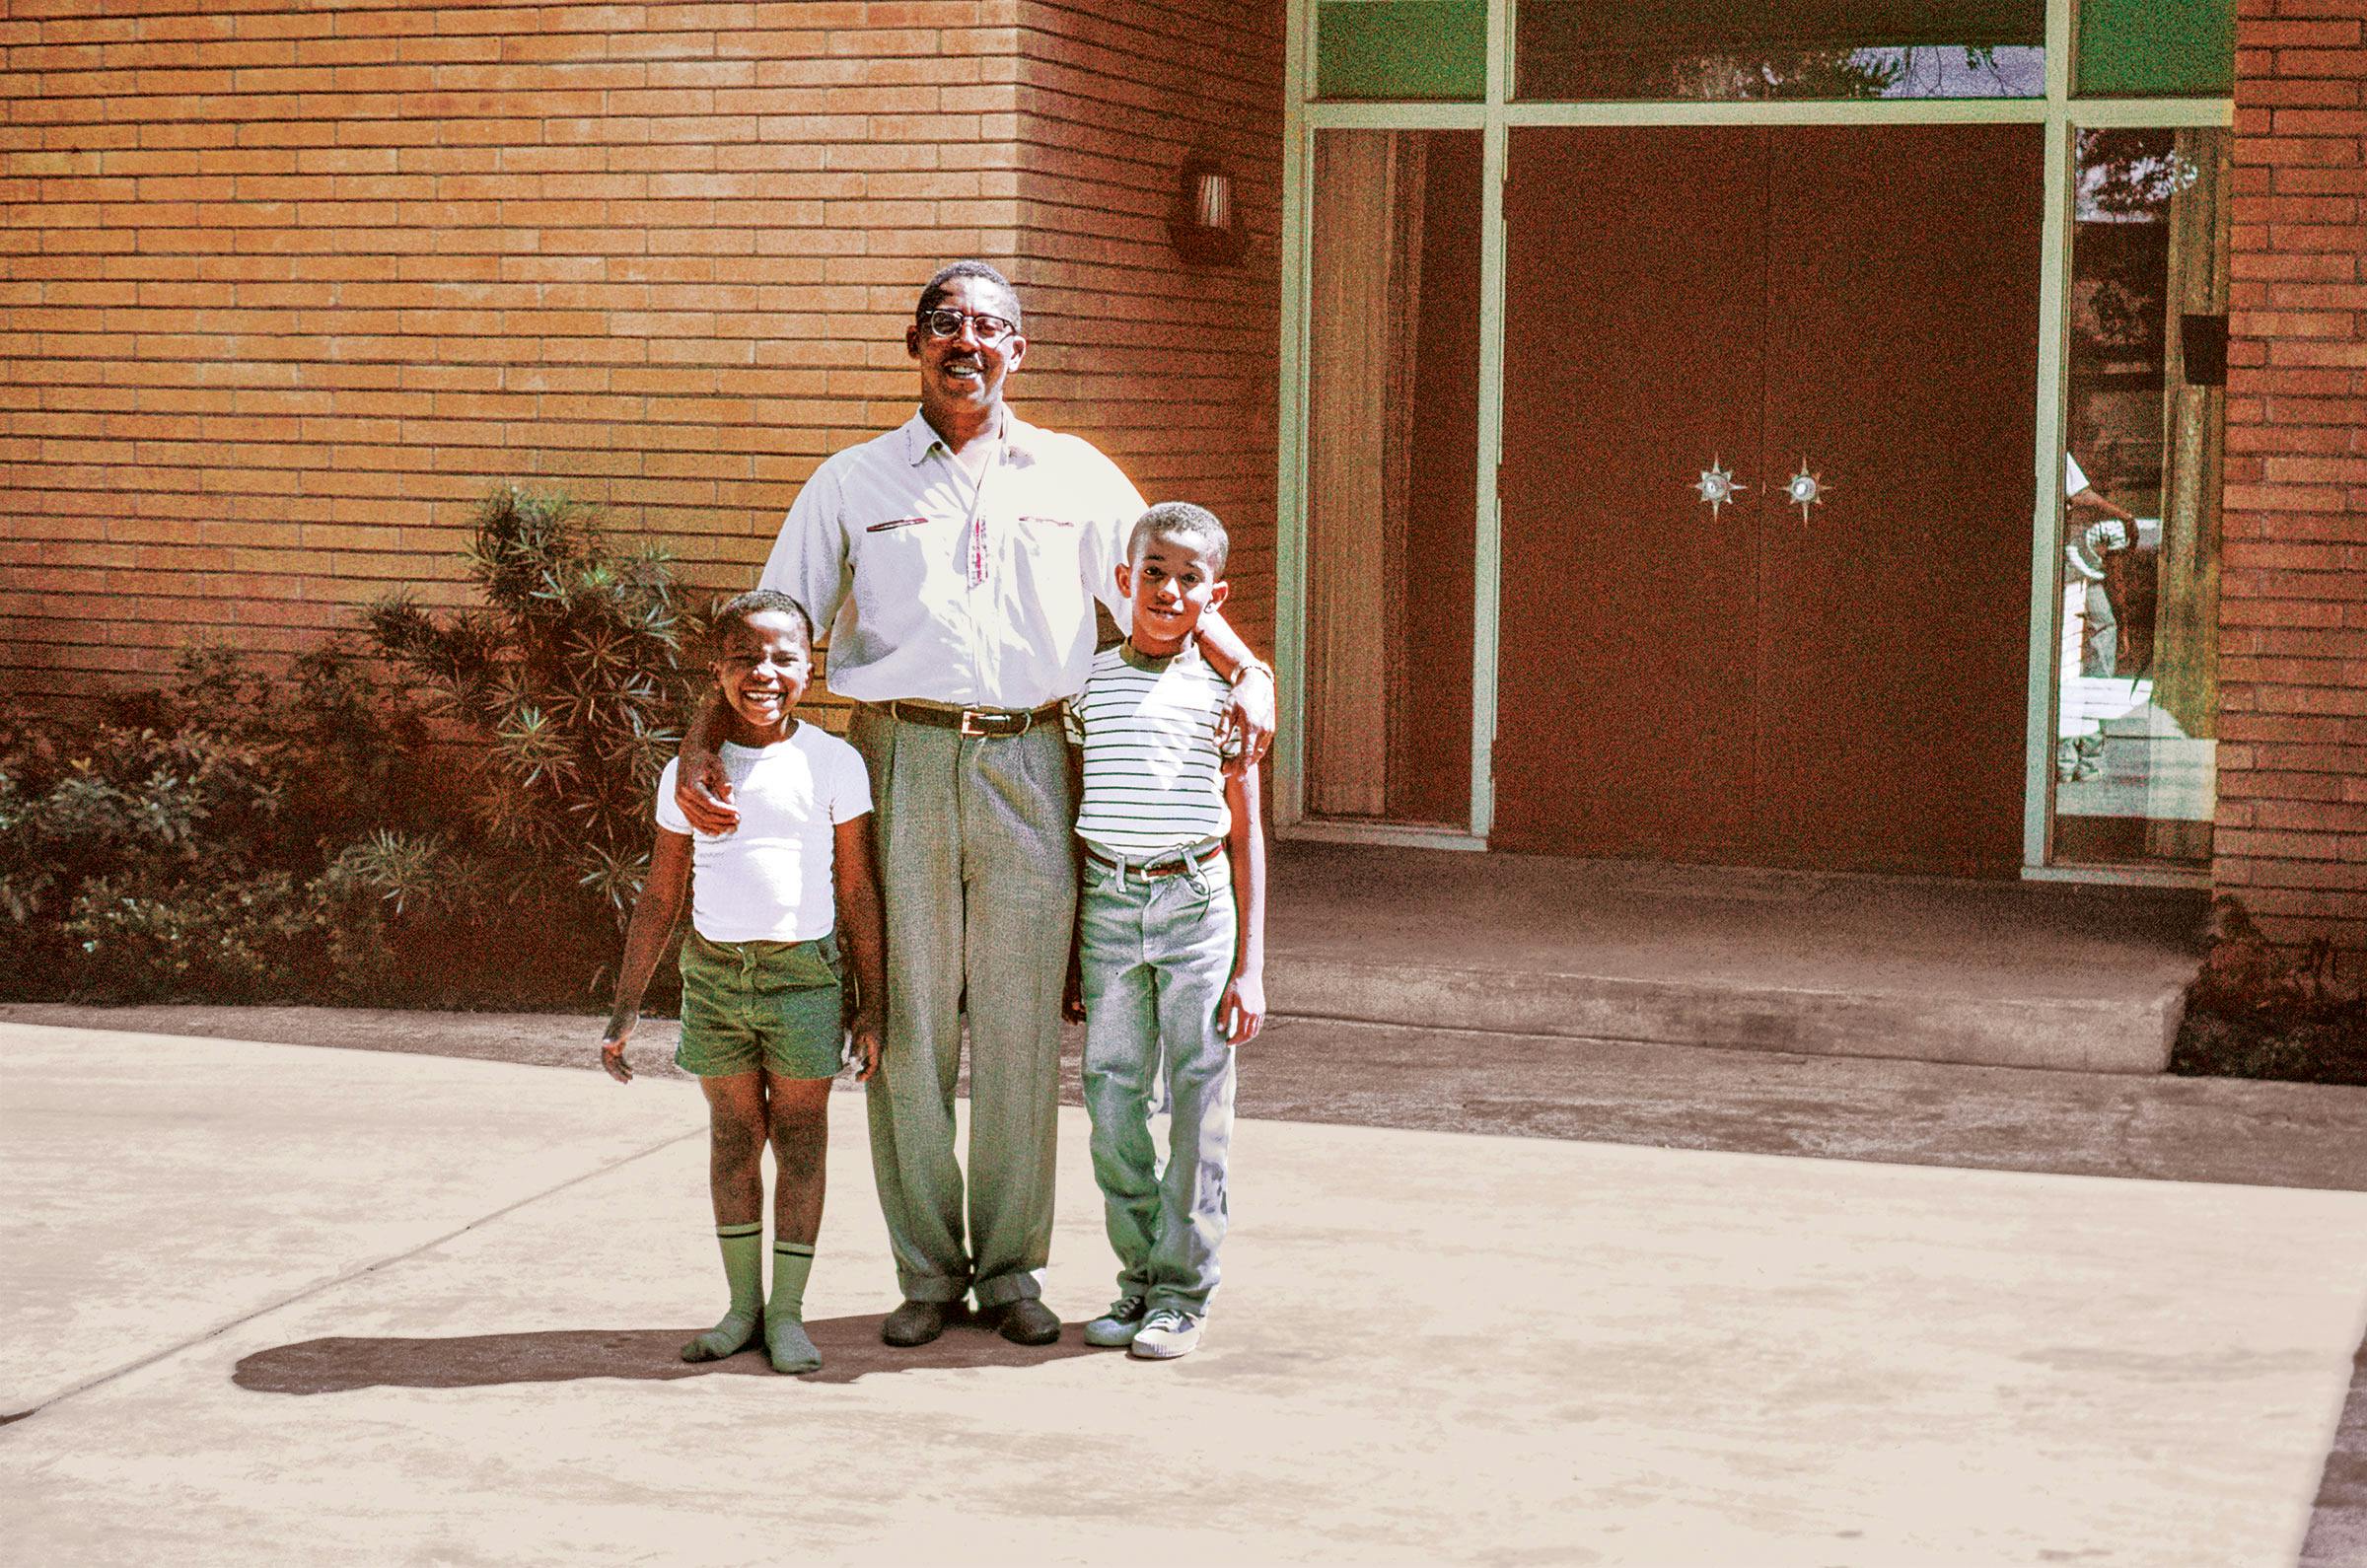 John S. Chase, with sons Anthony (left) and John (right), in front of the house, circa 1959.